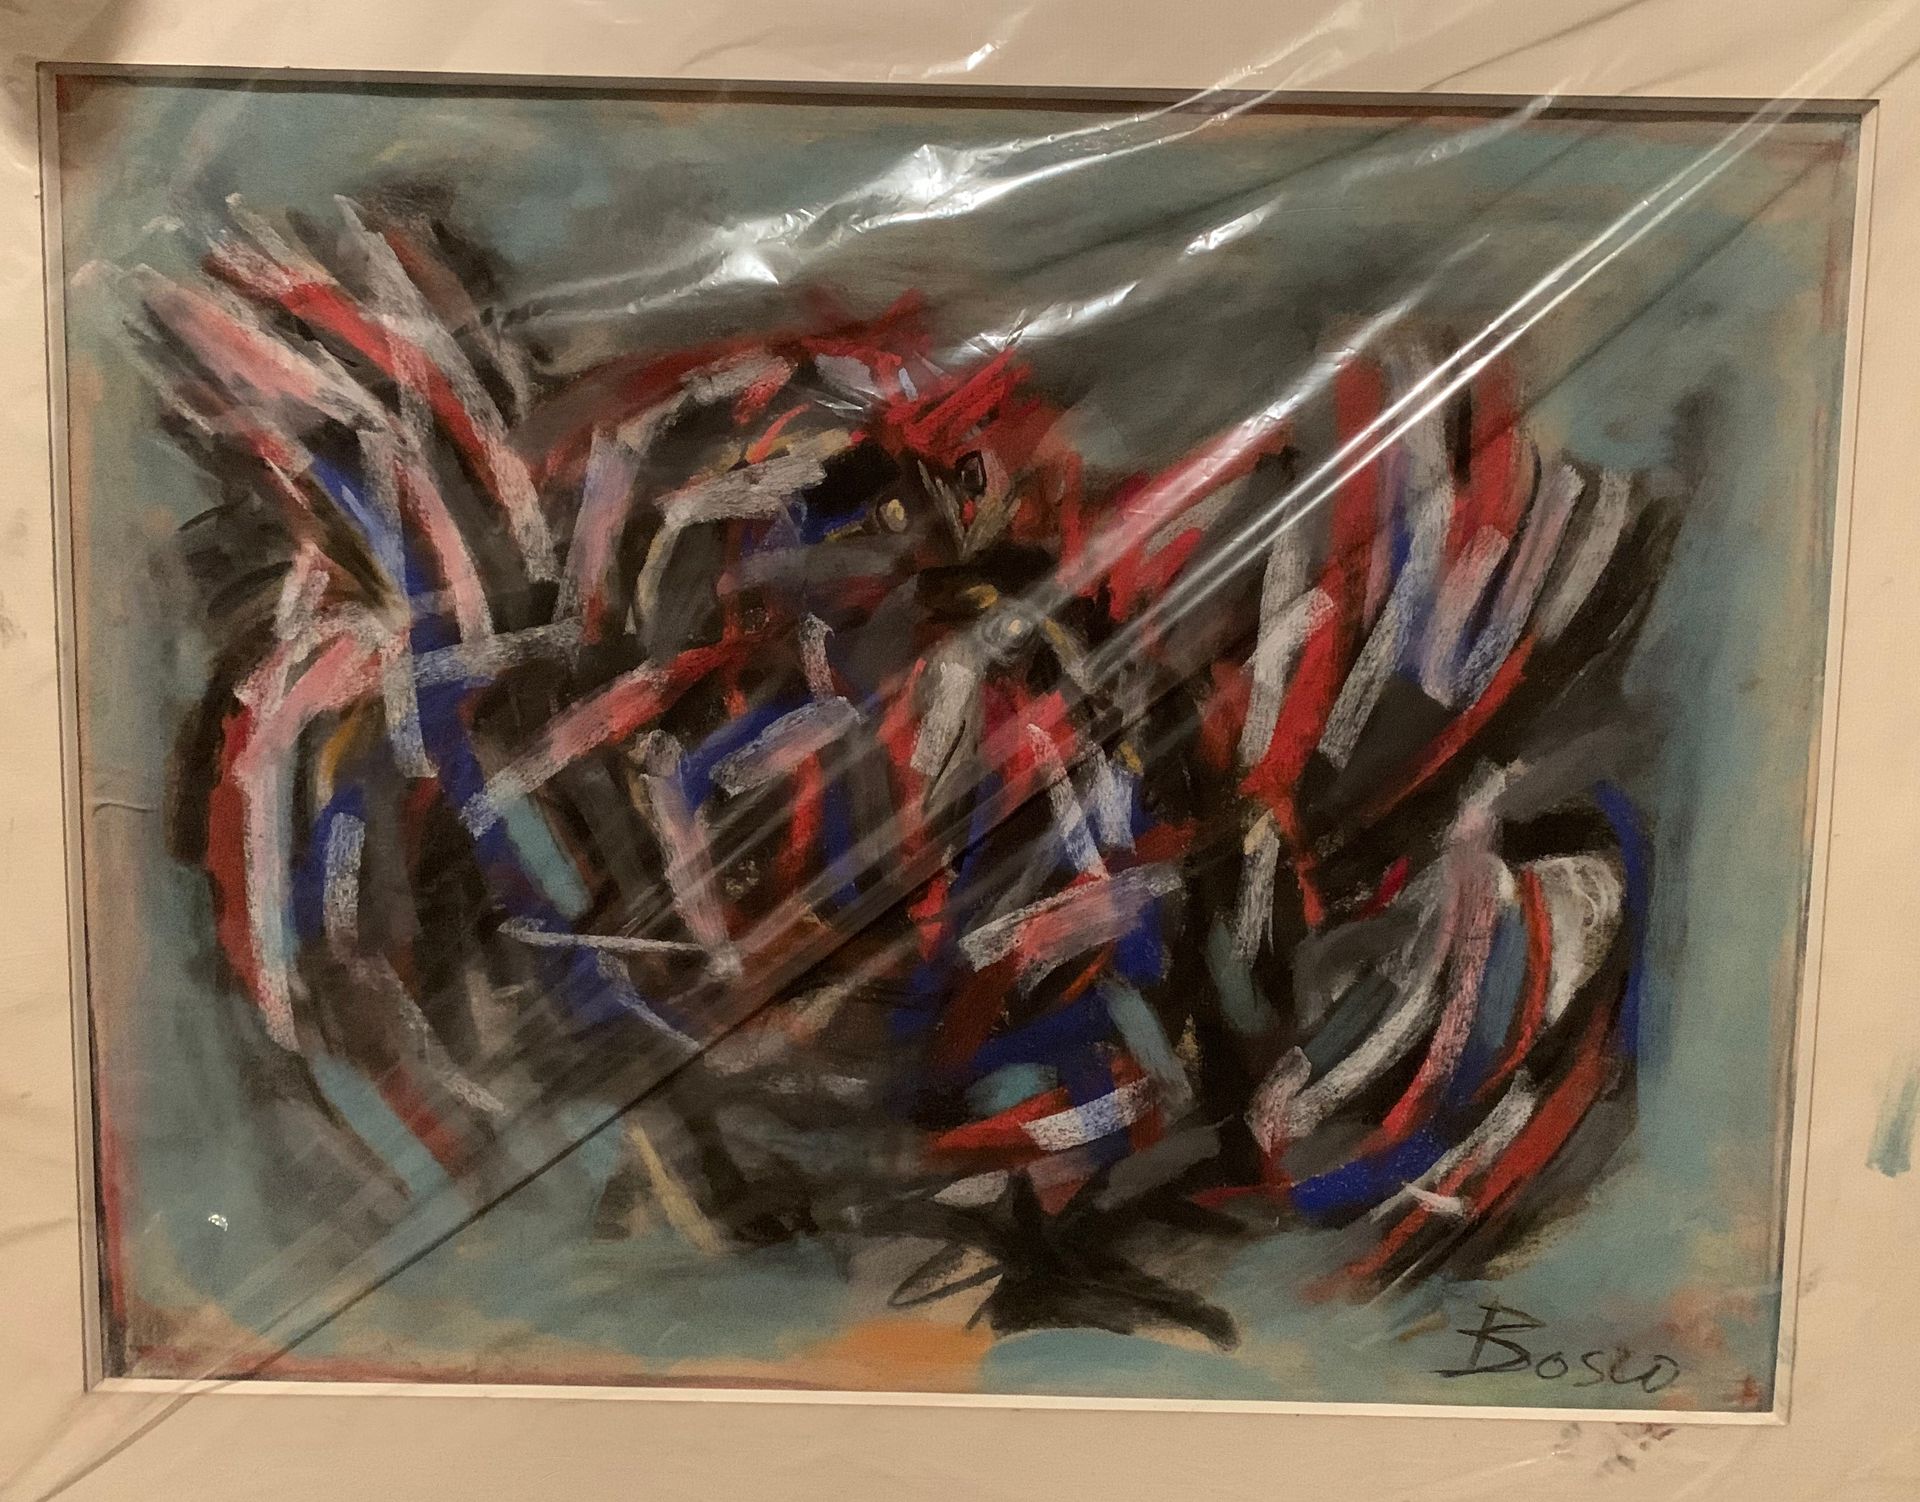 Null Pierre BOSCO (1909-1993)

Untitled

Pastel signed on the lower right

42 x &hellip;